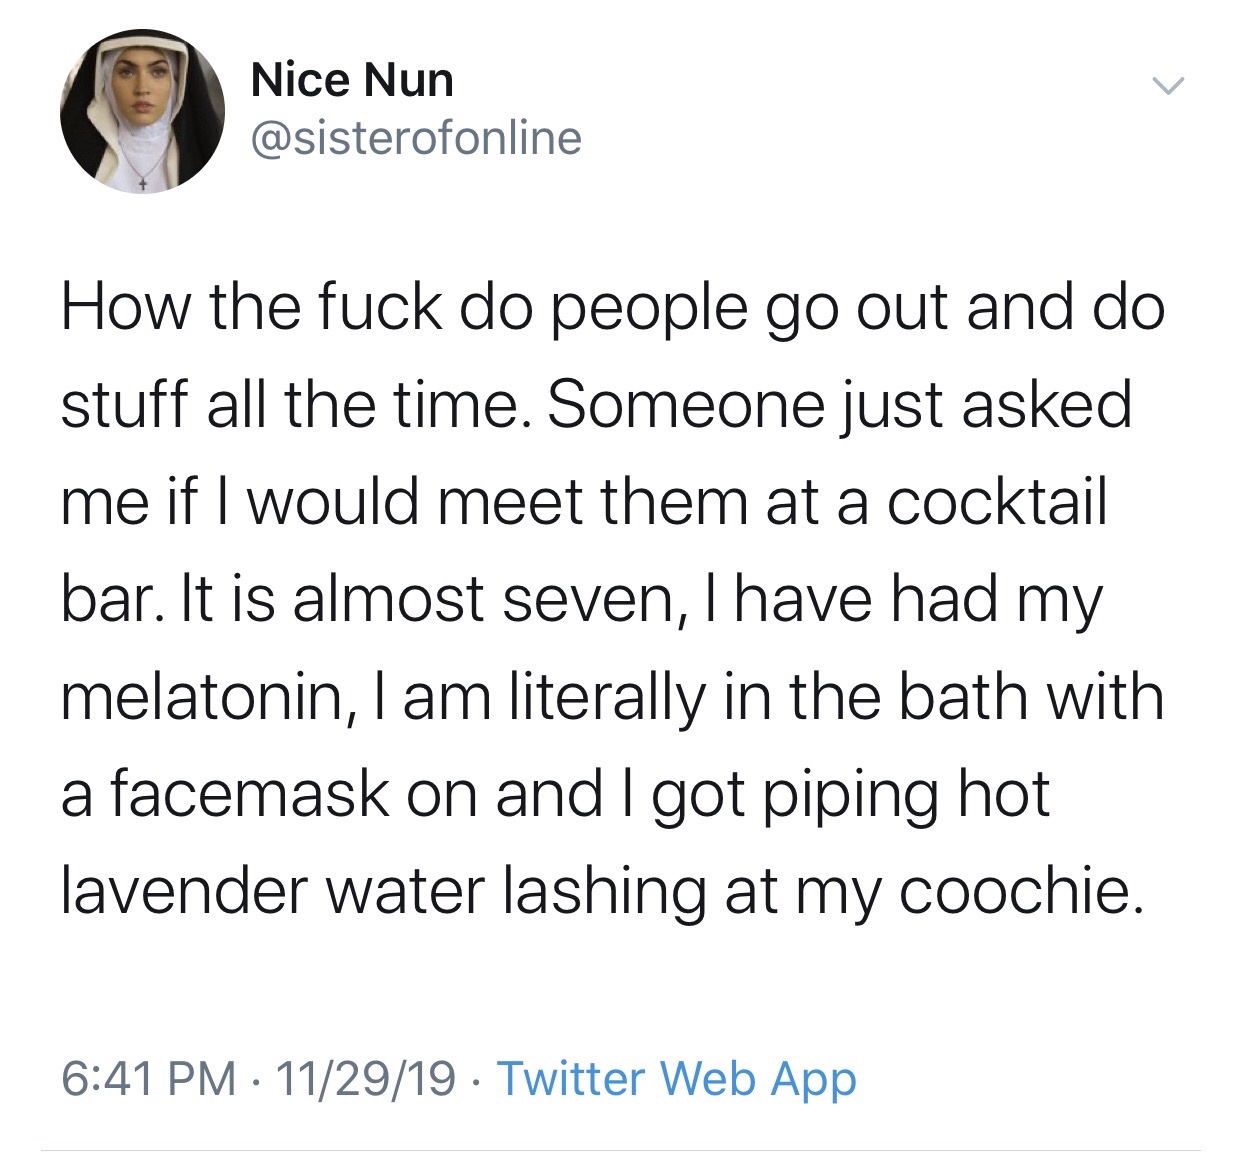 angle - Nice Nun How the fuck do people go out and do stuff all the time. Someone just asked me if I would meet them at a cocktail bar. It is almost seven, I have had my melatonin, I am literally in the bath with a facemask on and I got piping hot lavende